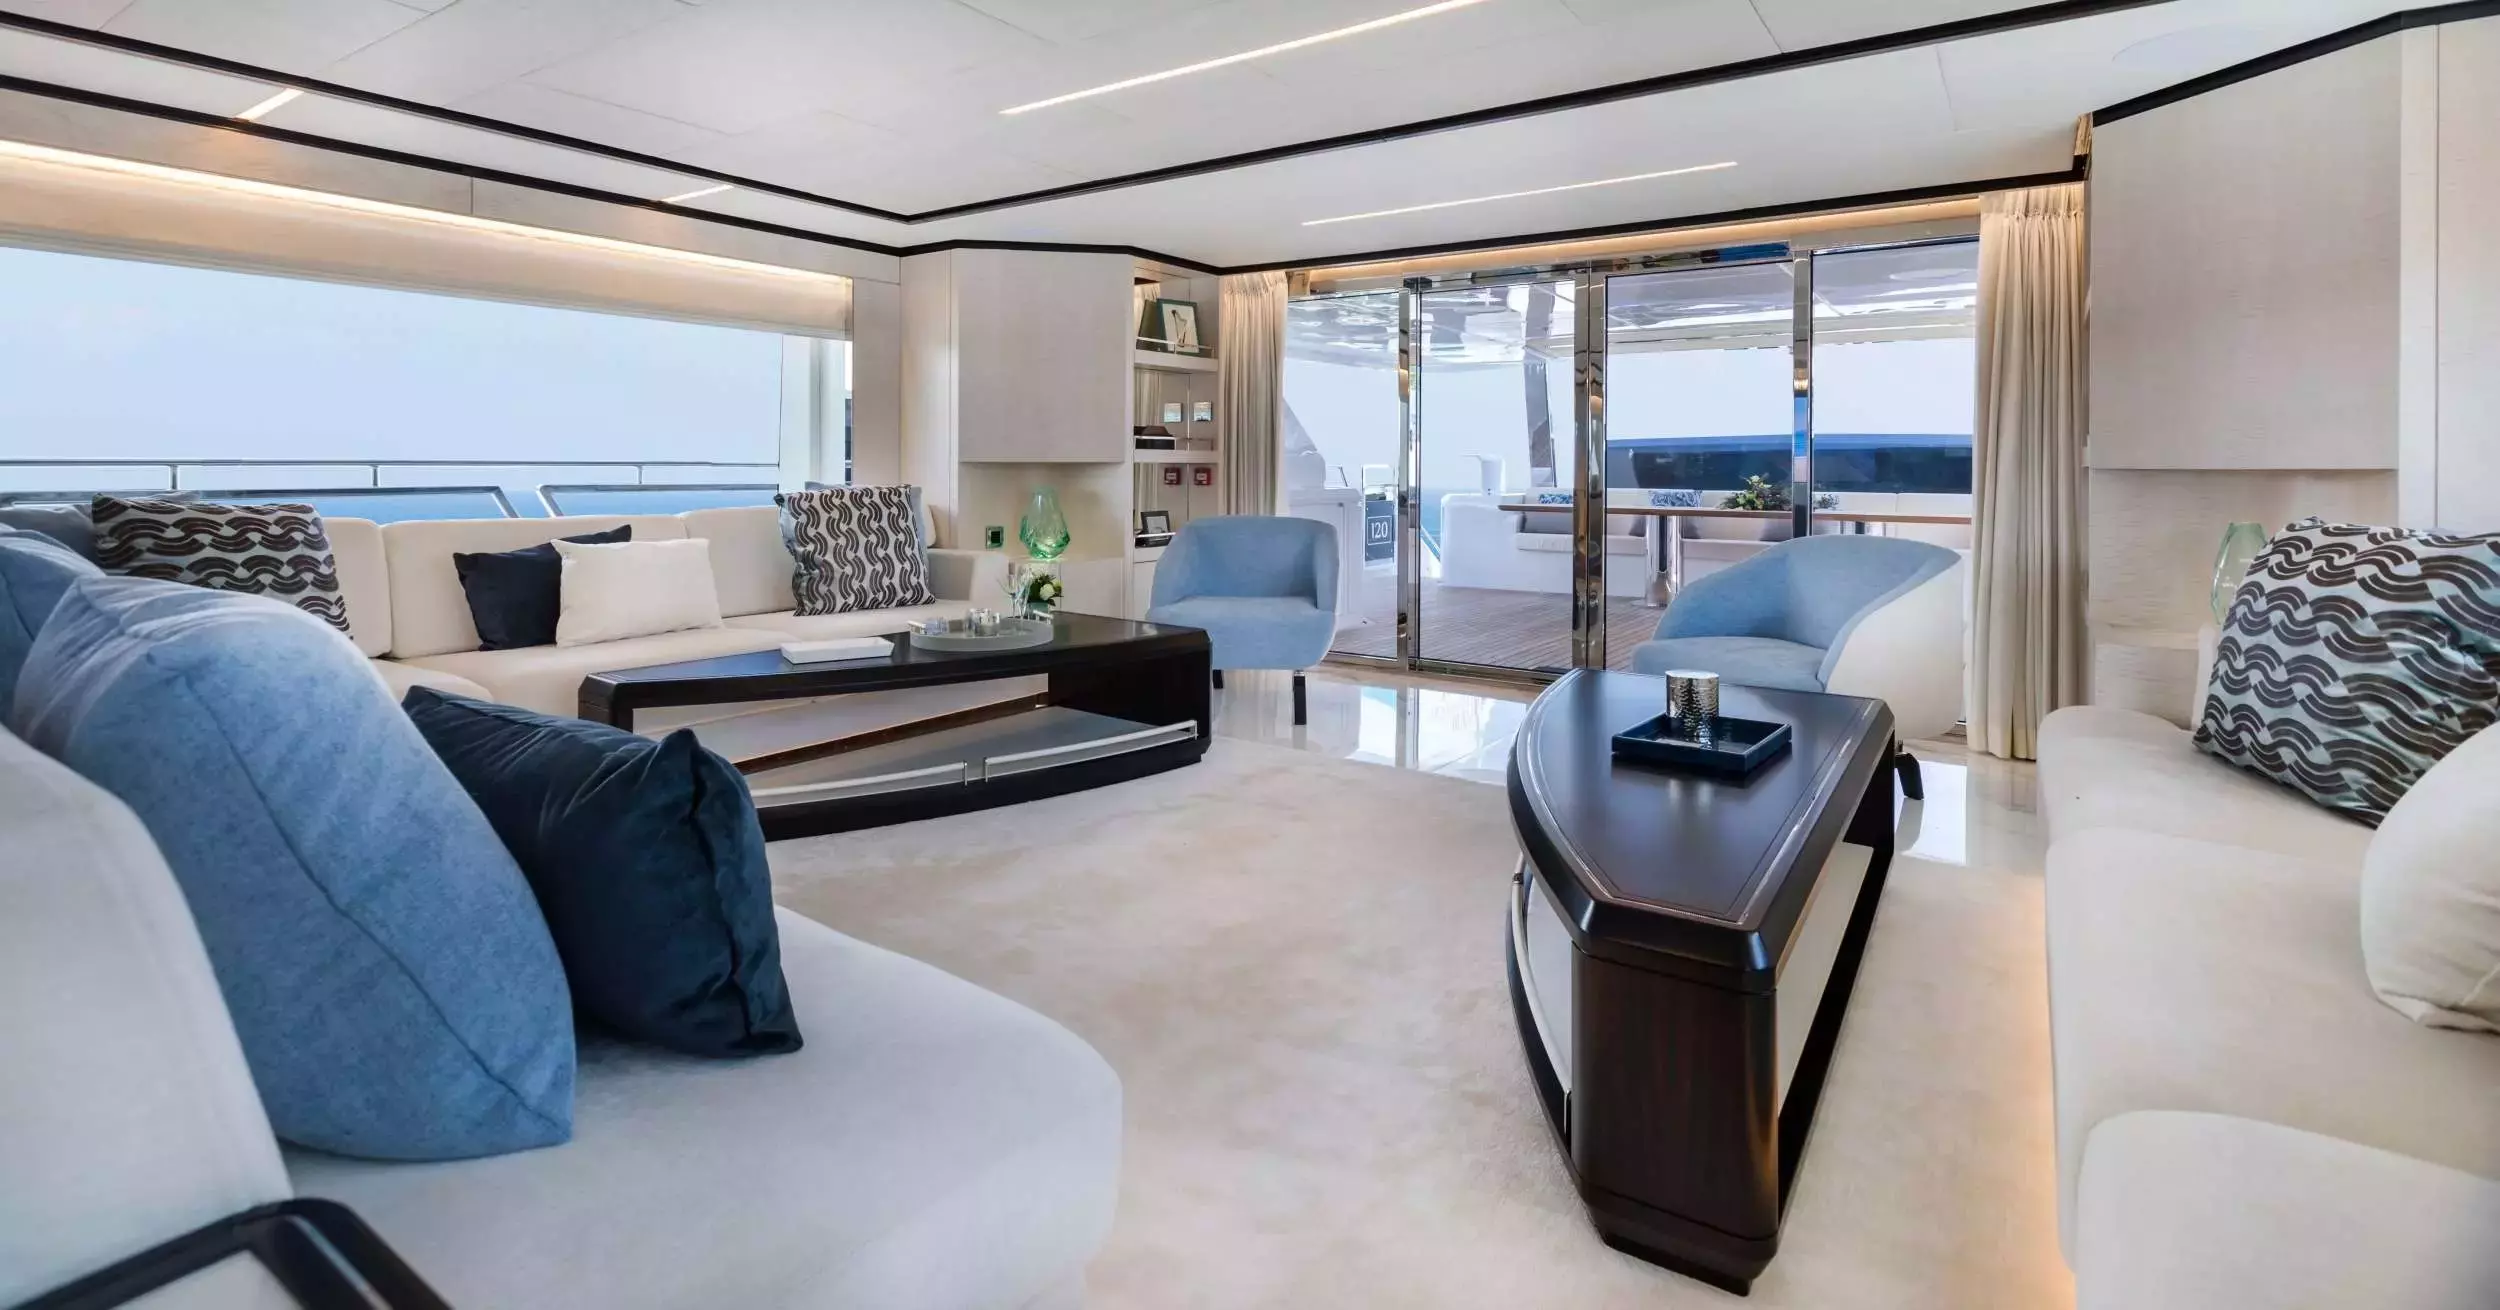 Rocket One by Gulf Craft - Top rates for a Charter of a private Superyacht in Monaco